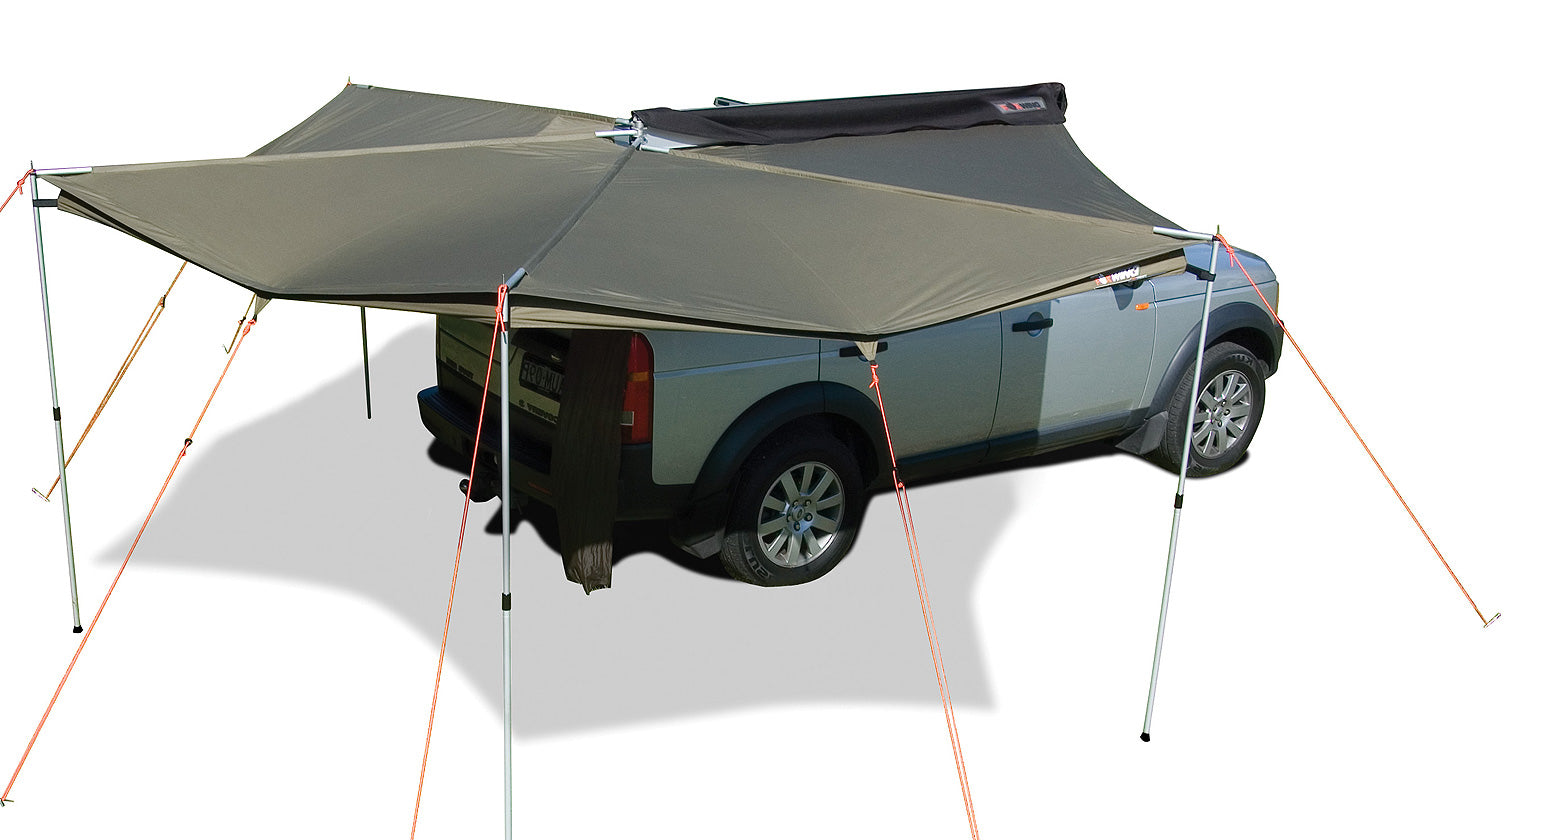 Foxwing awning shown with legs and guy ropes included